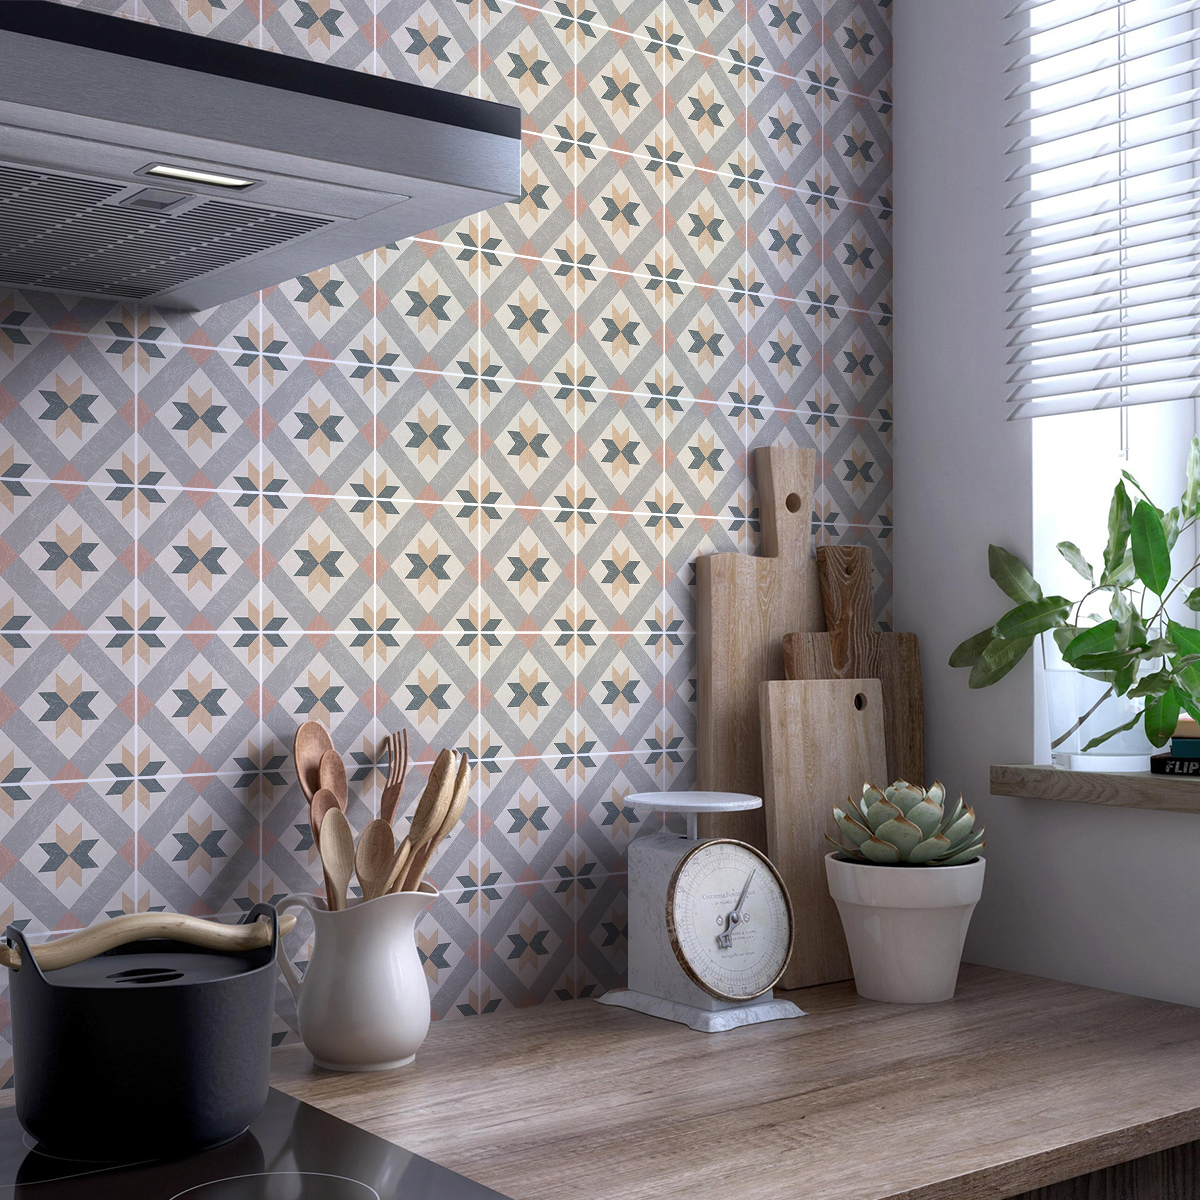 24 wall stickers cement tiles ahenia